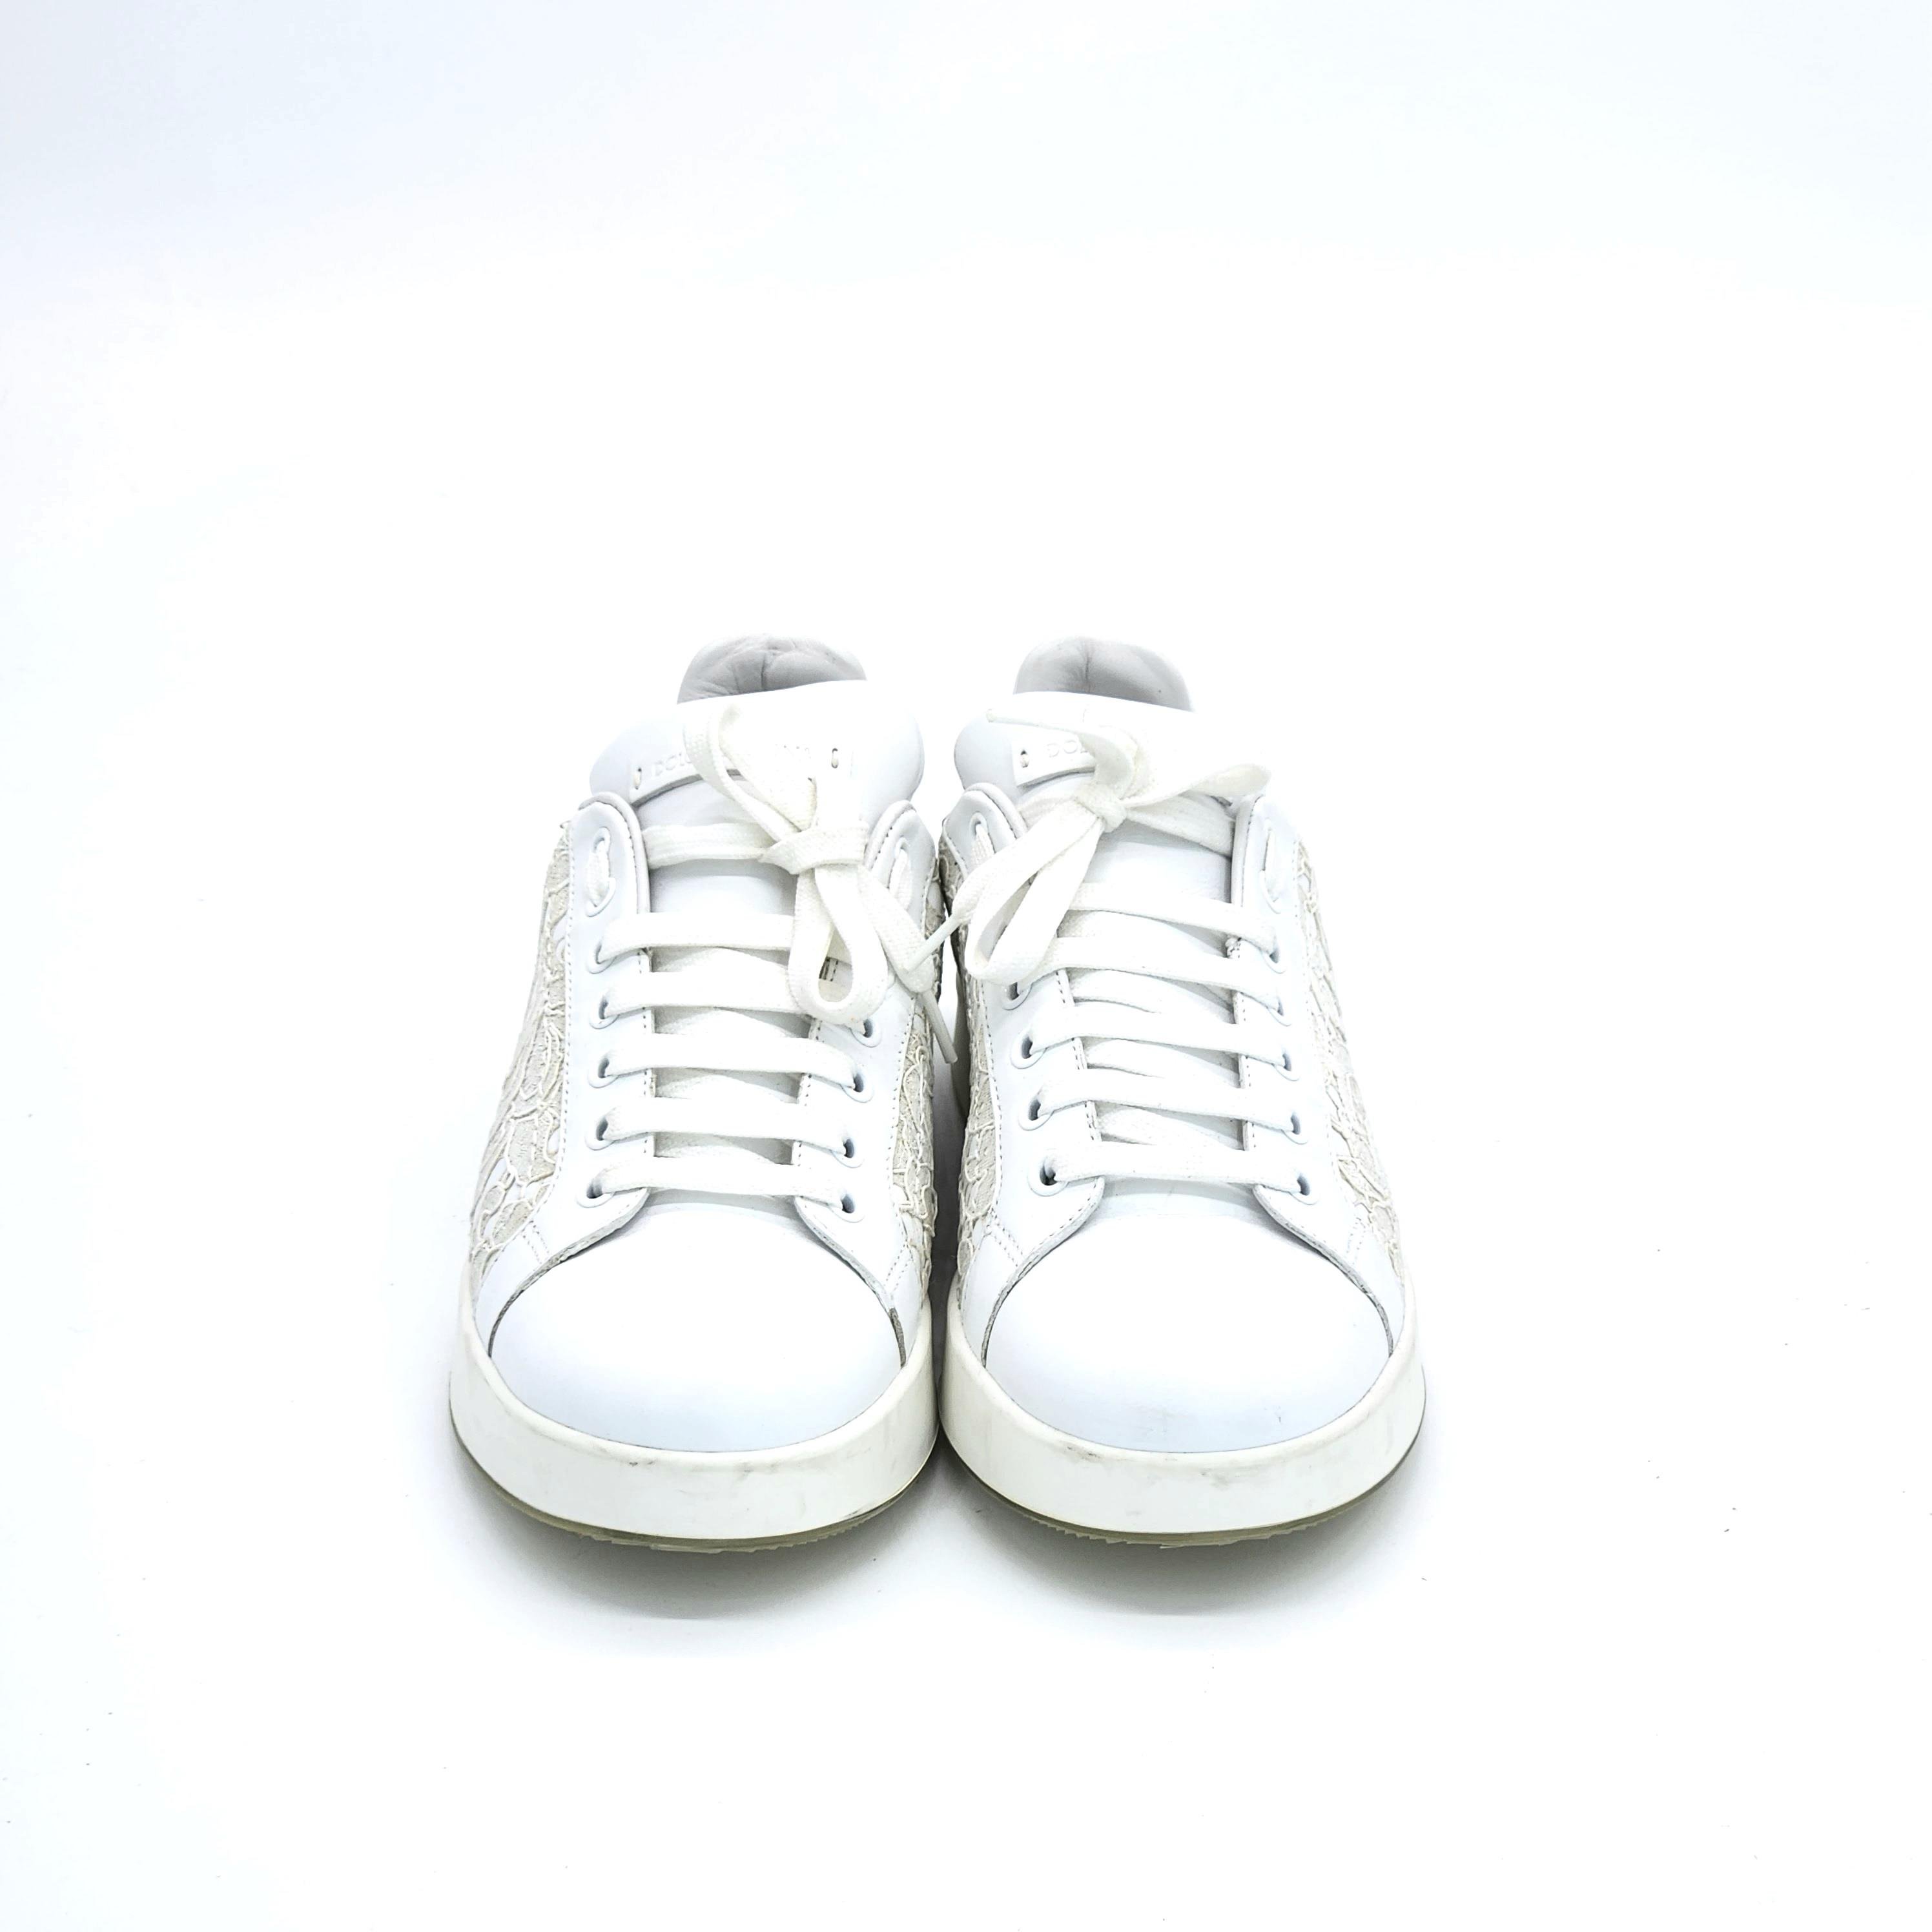 Dolce Gabbana White Leather Lace Sneakers 38